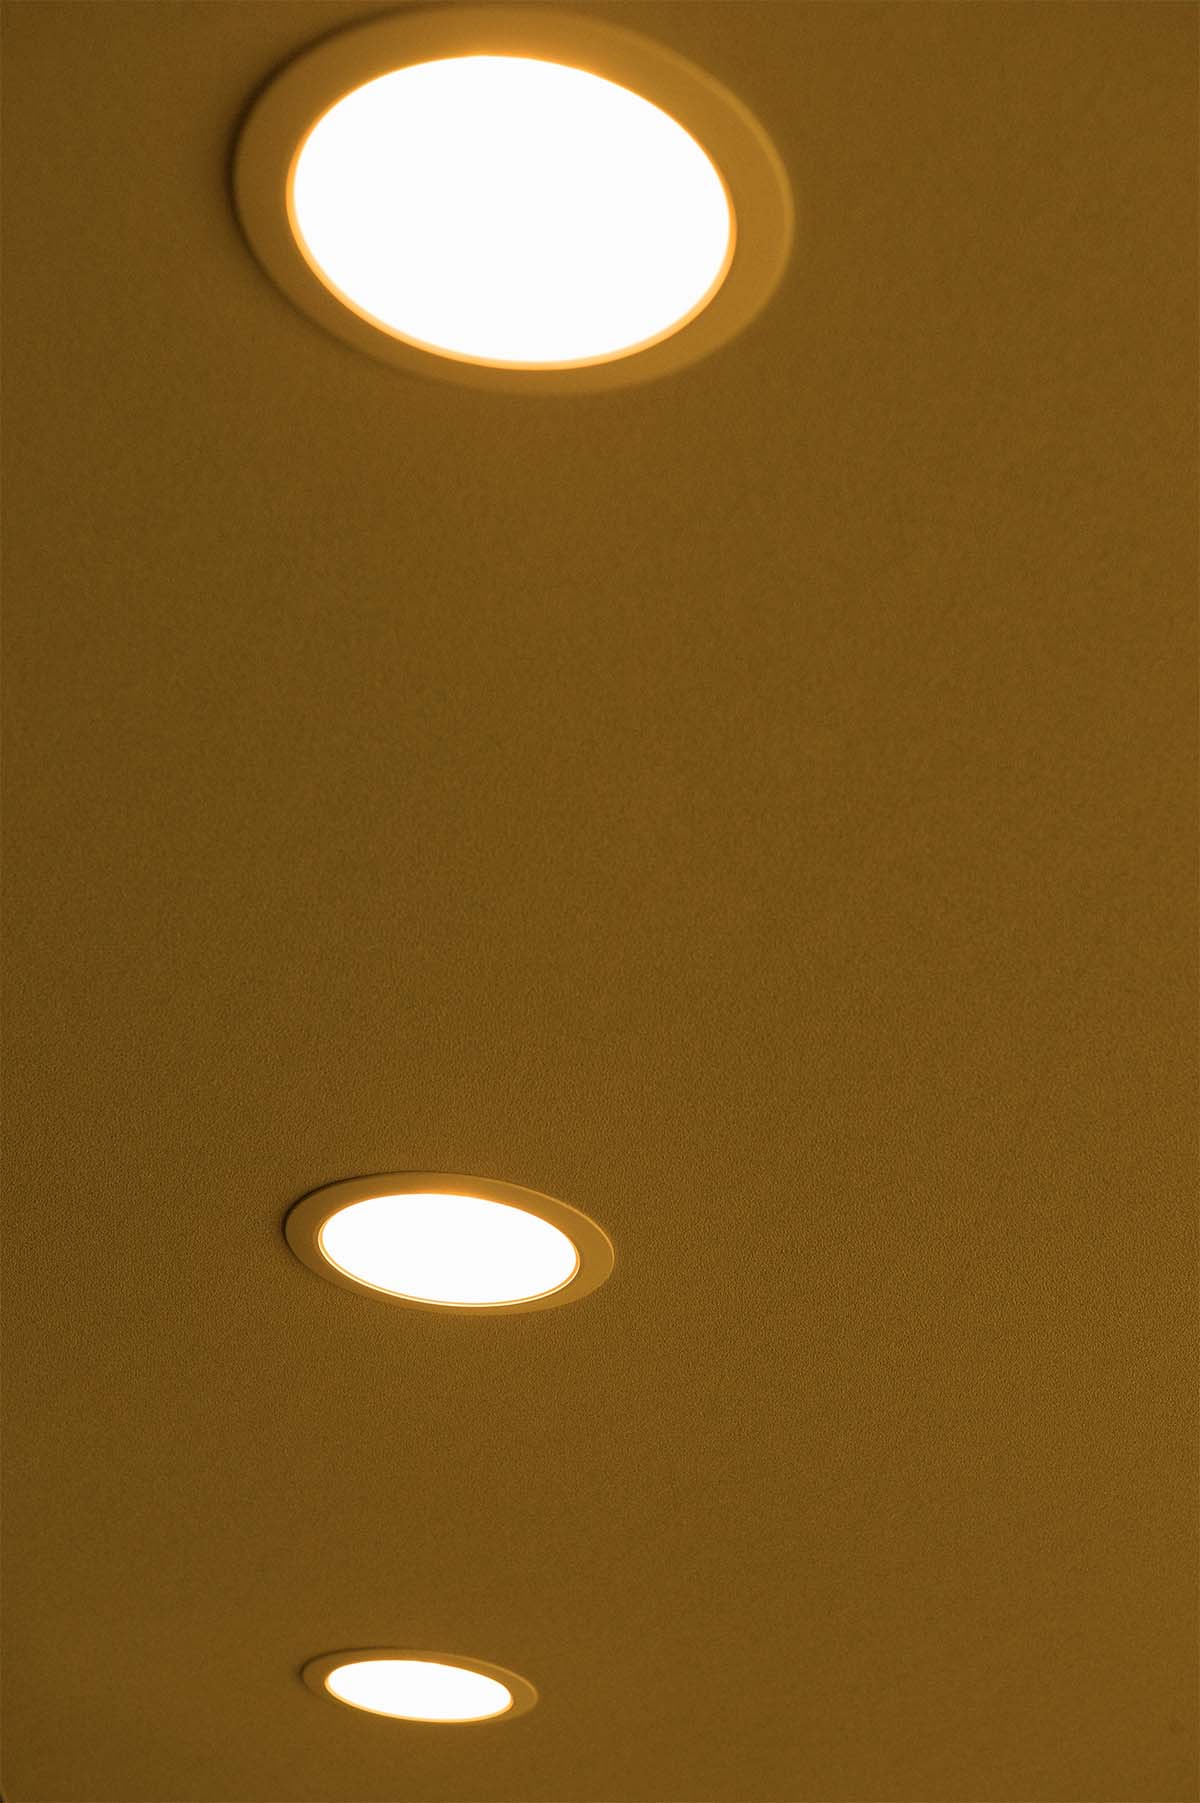 Large Diameter LED Downlights Installed In A Ceiling